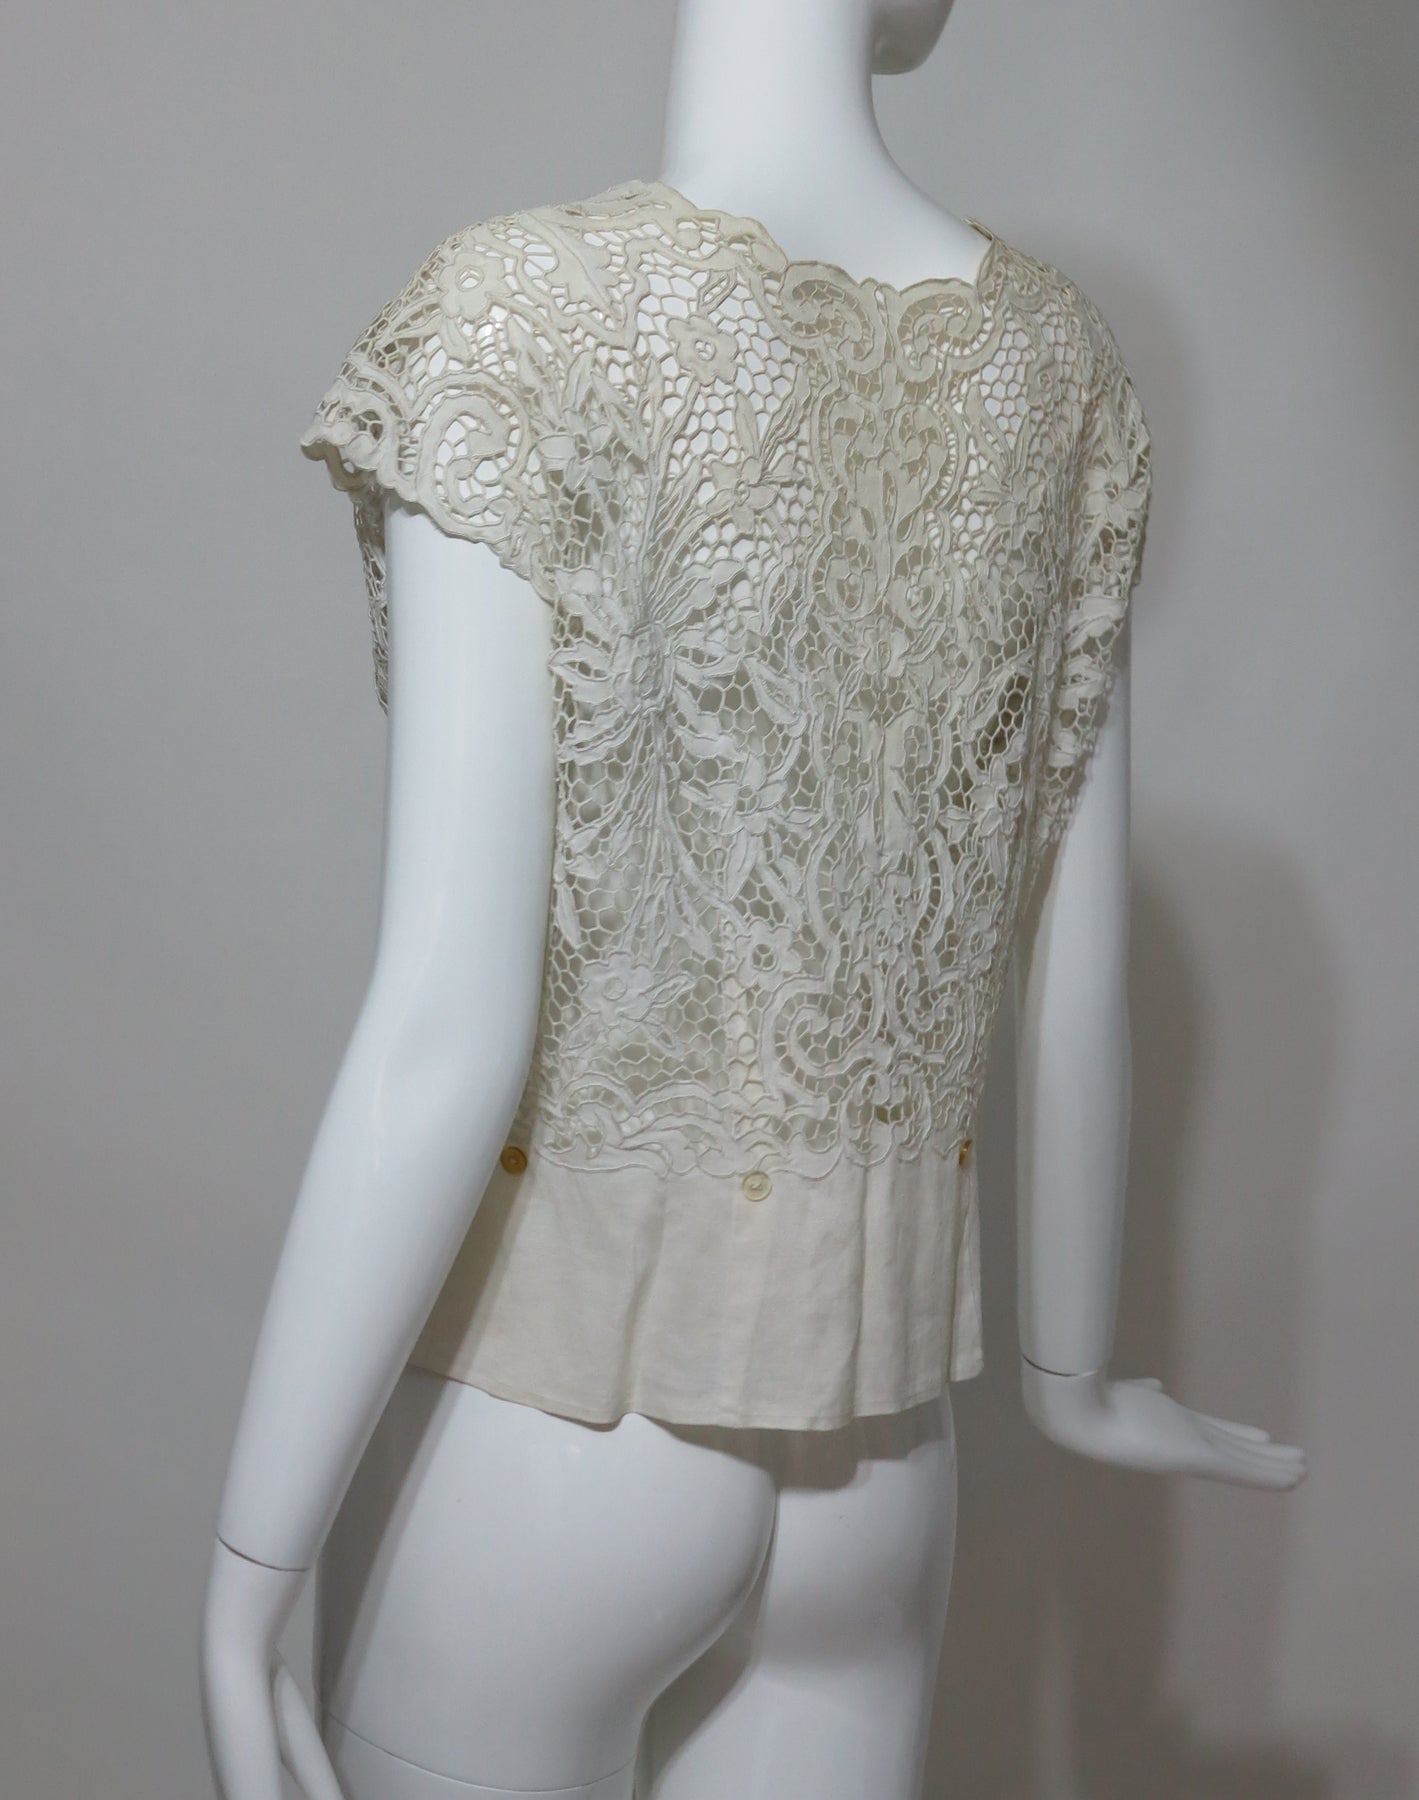 SOLD Madeira handmade cut work lace embroidered blouse s